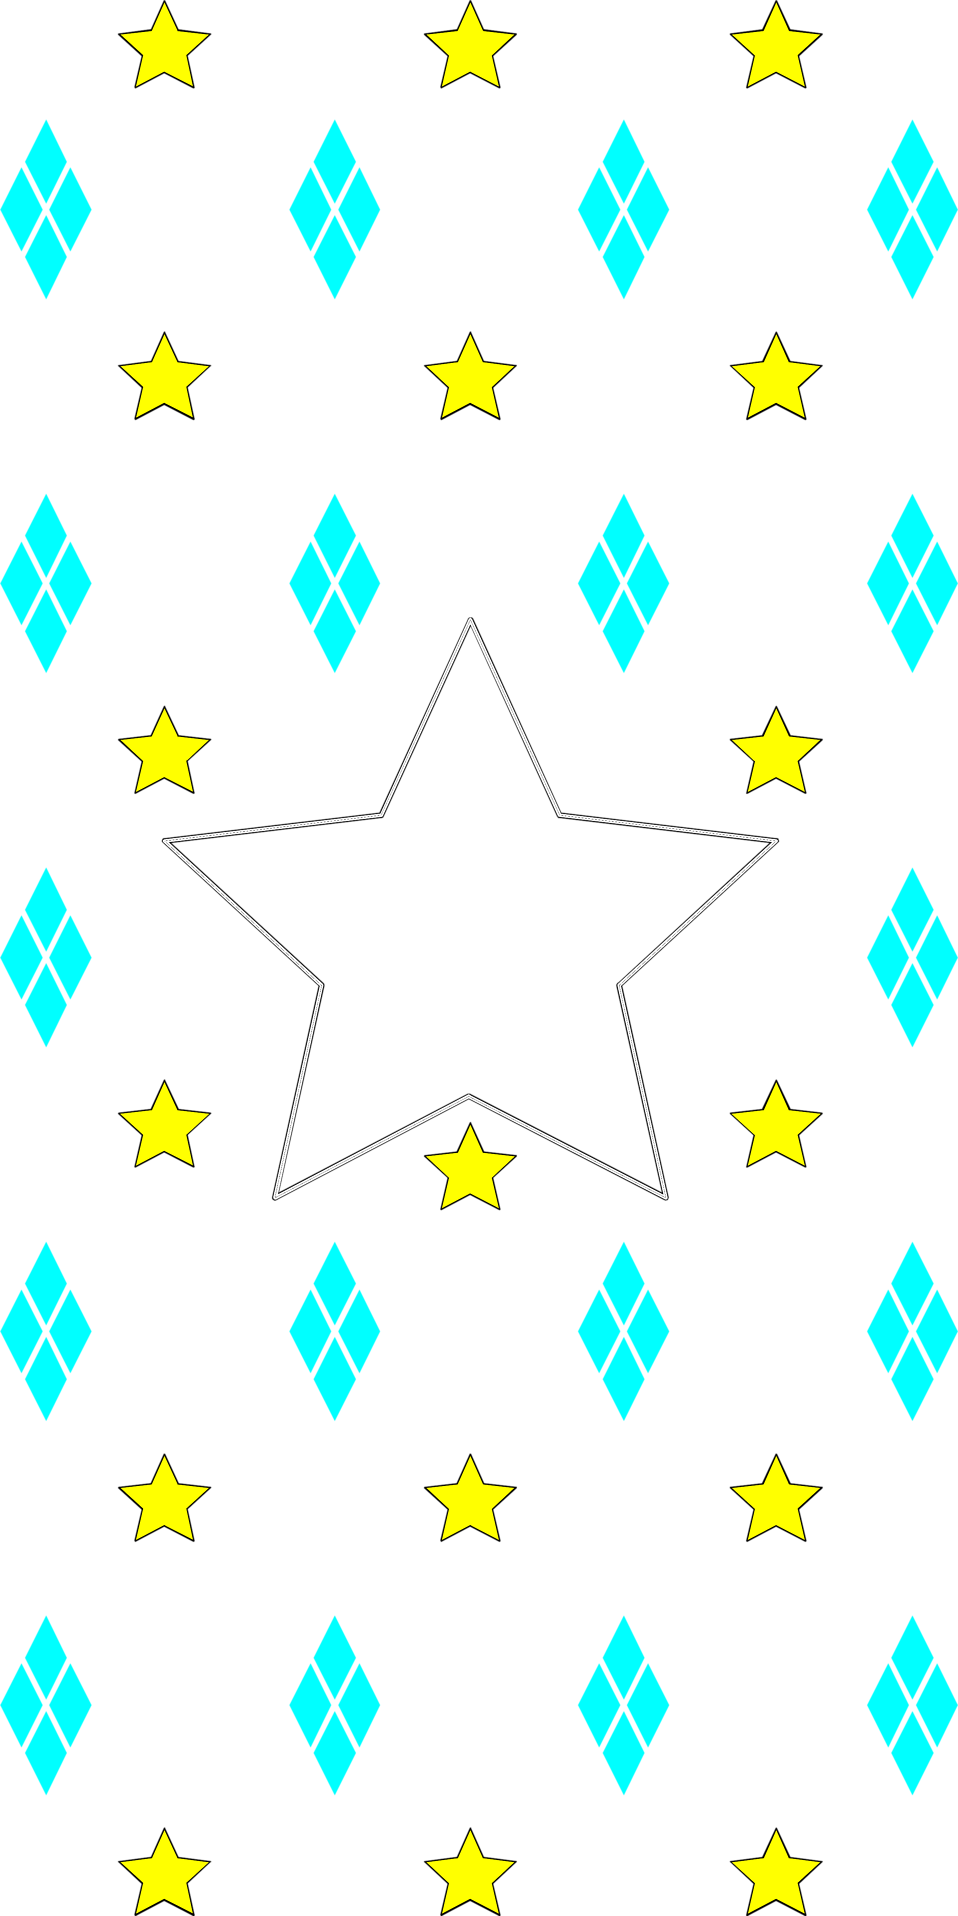 Star free stock photo. Clipart designs background